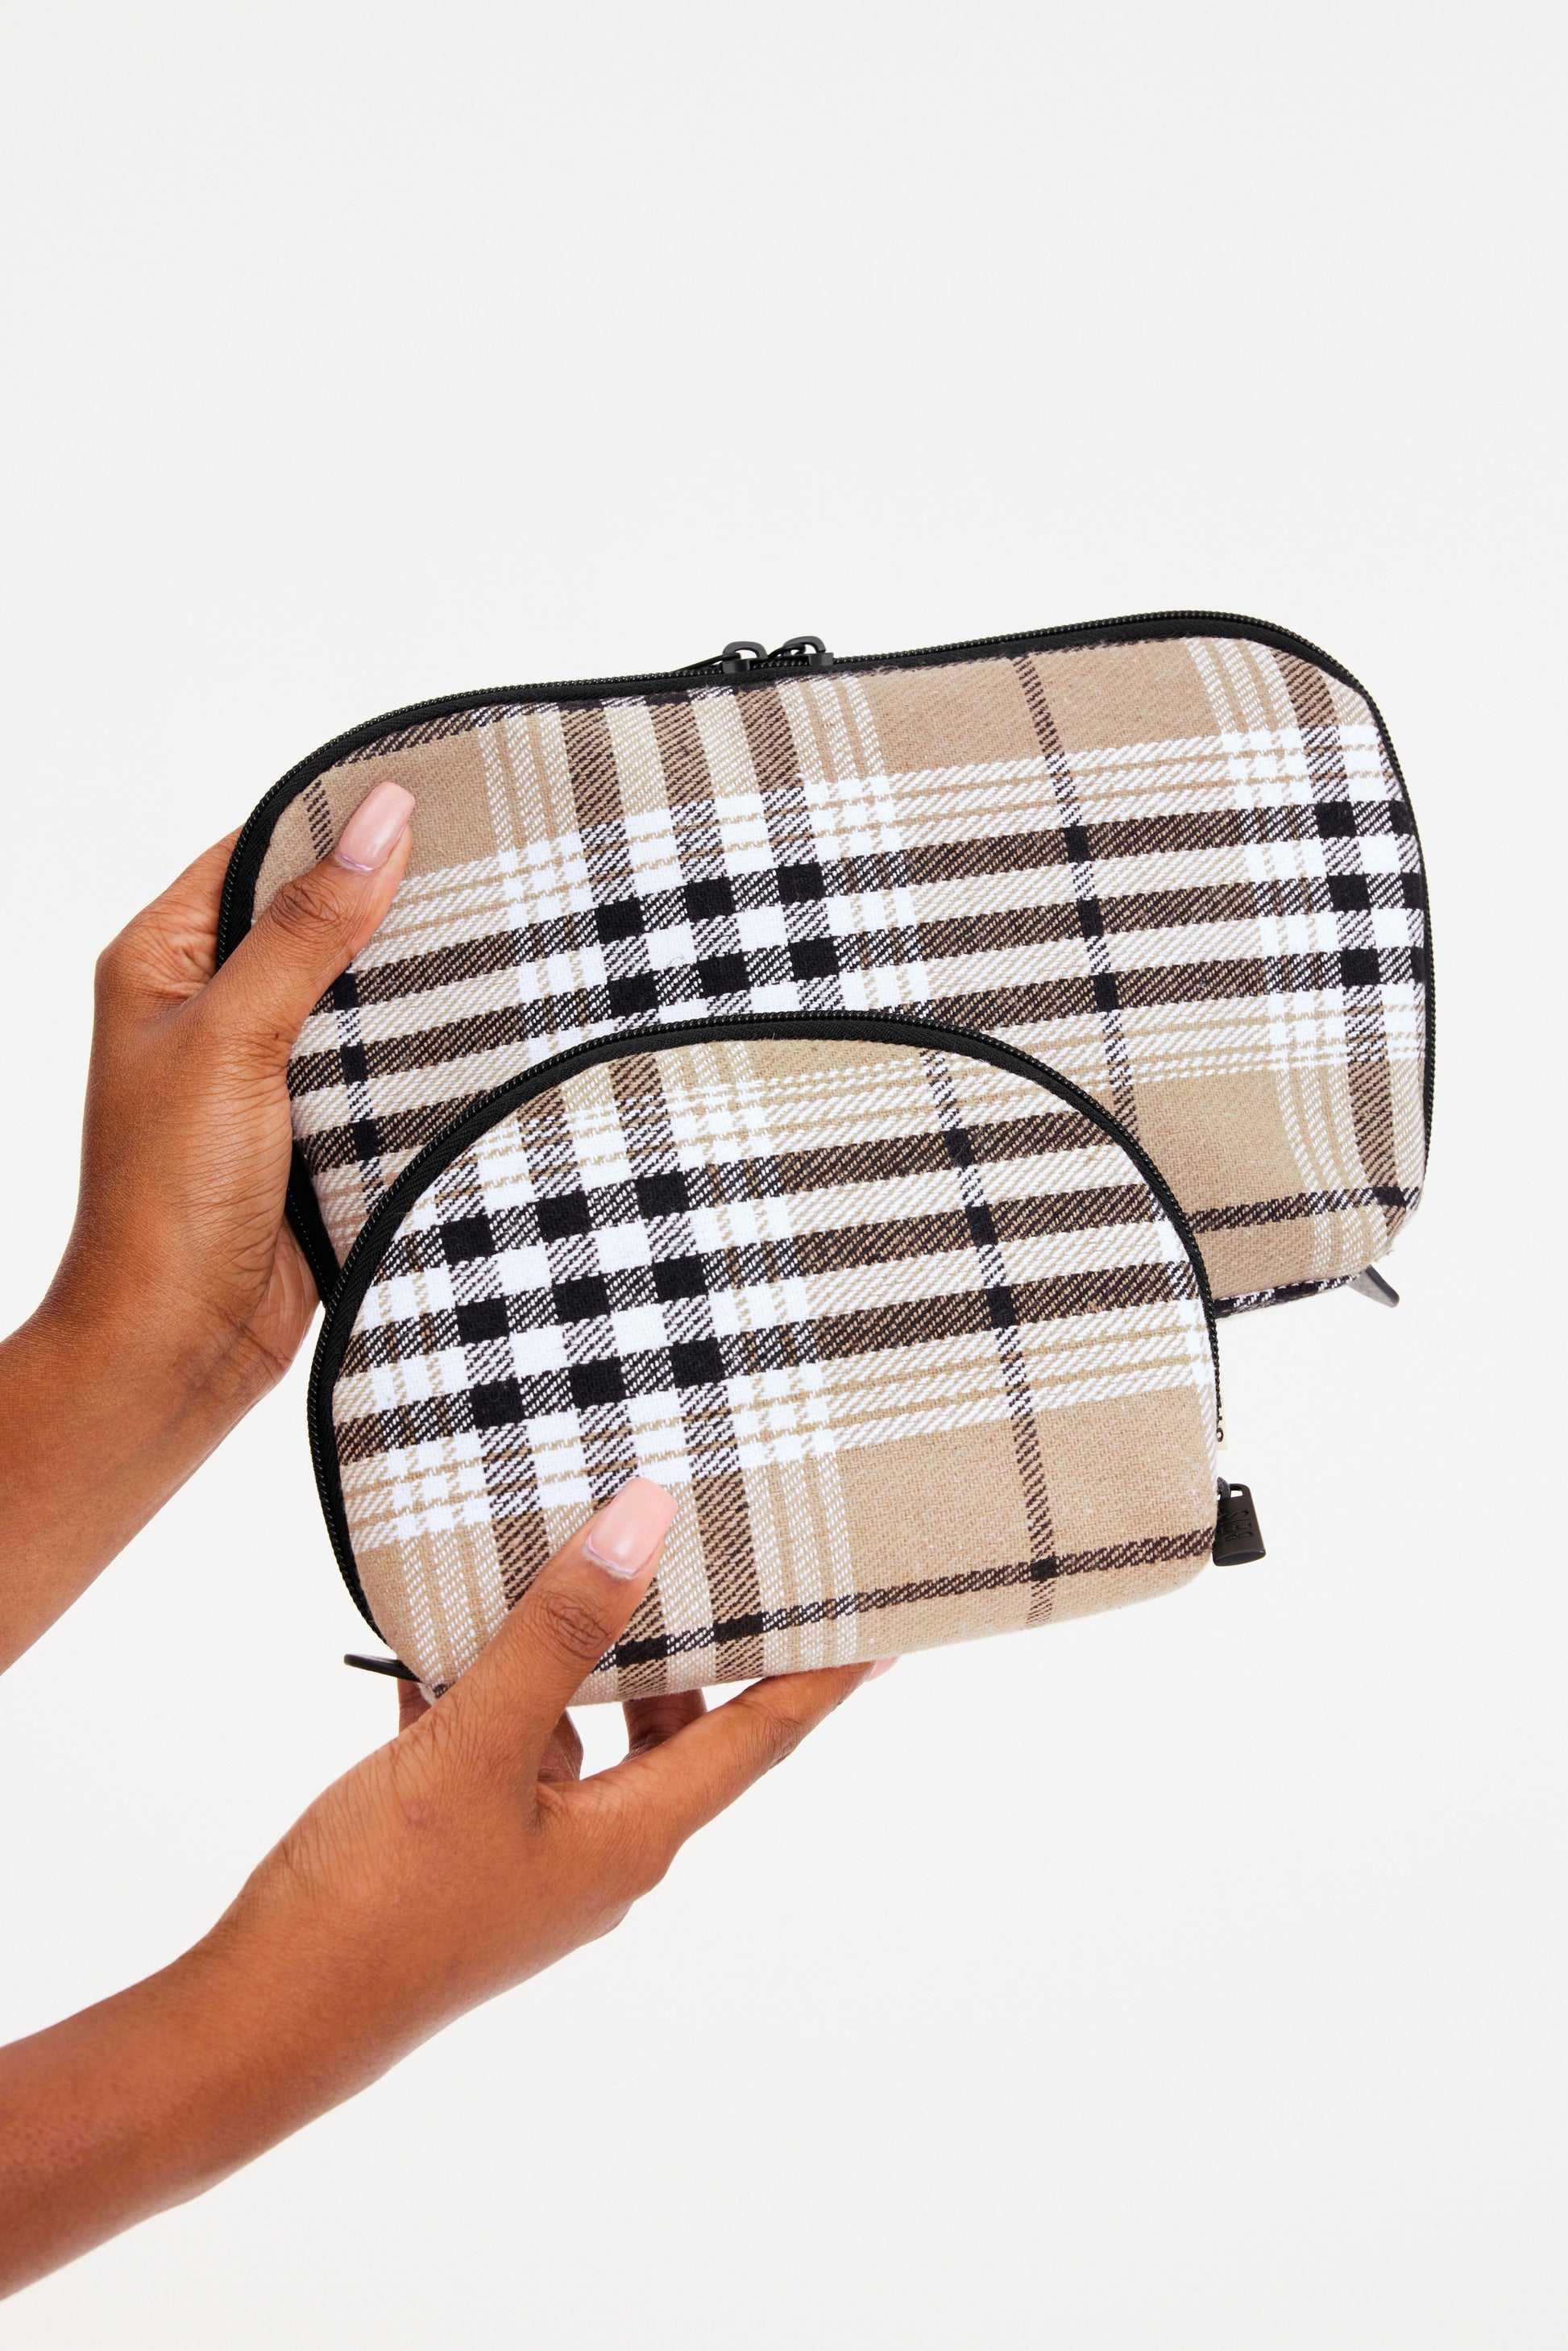 My Makeup Pouch with Coated Lining | Bag-all Gingham